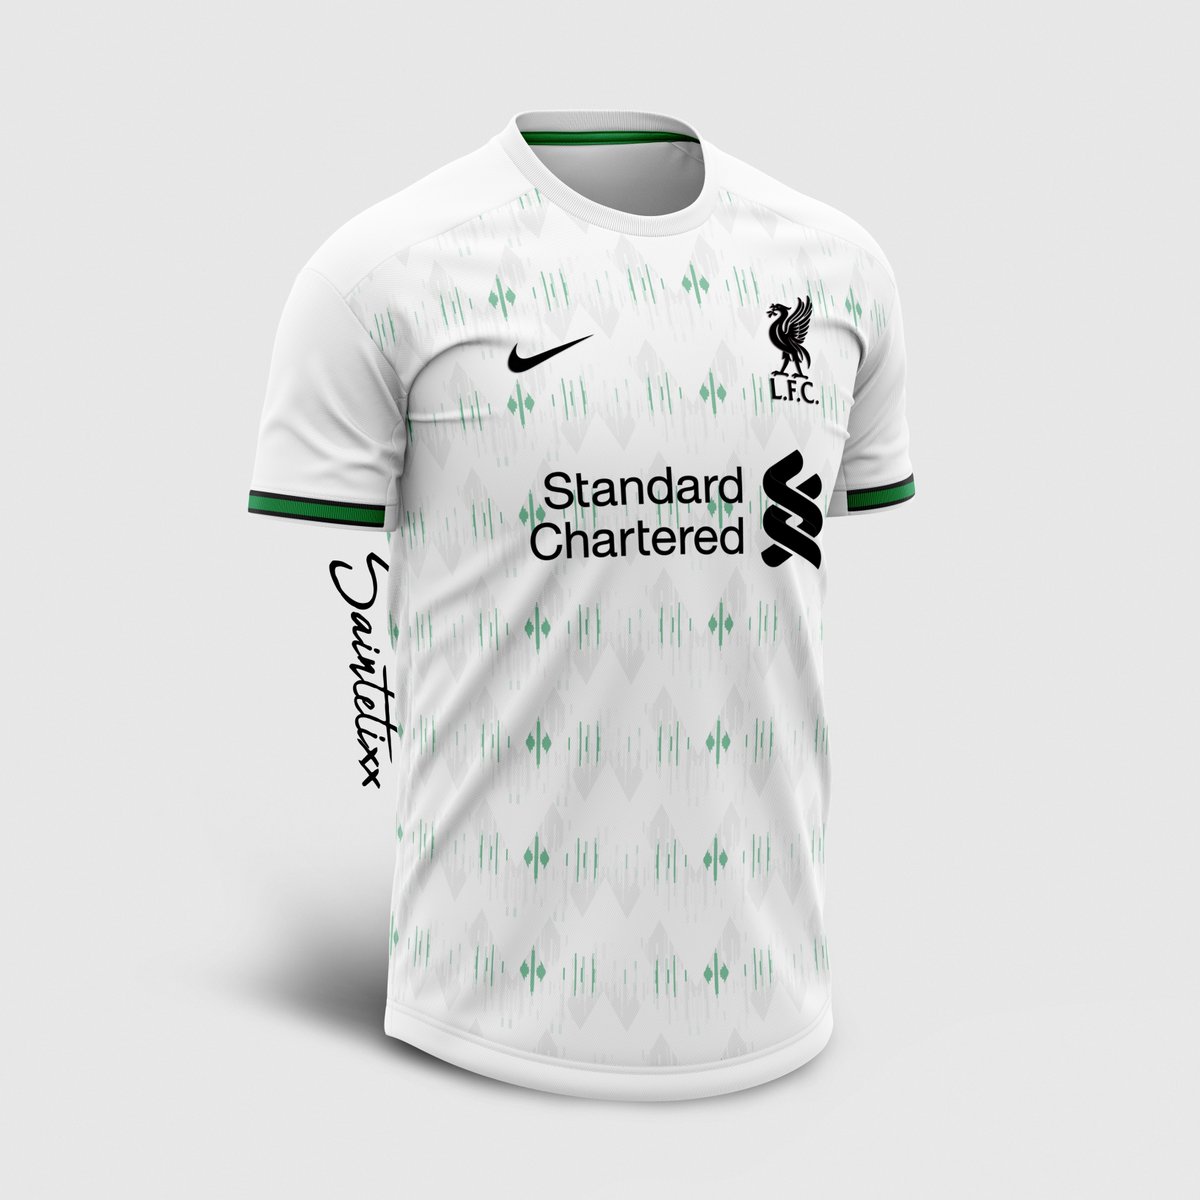 liverpool green and white jersey